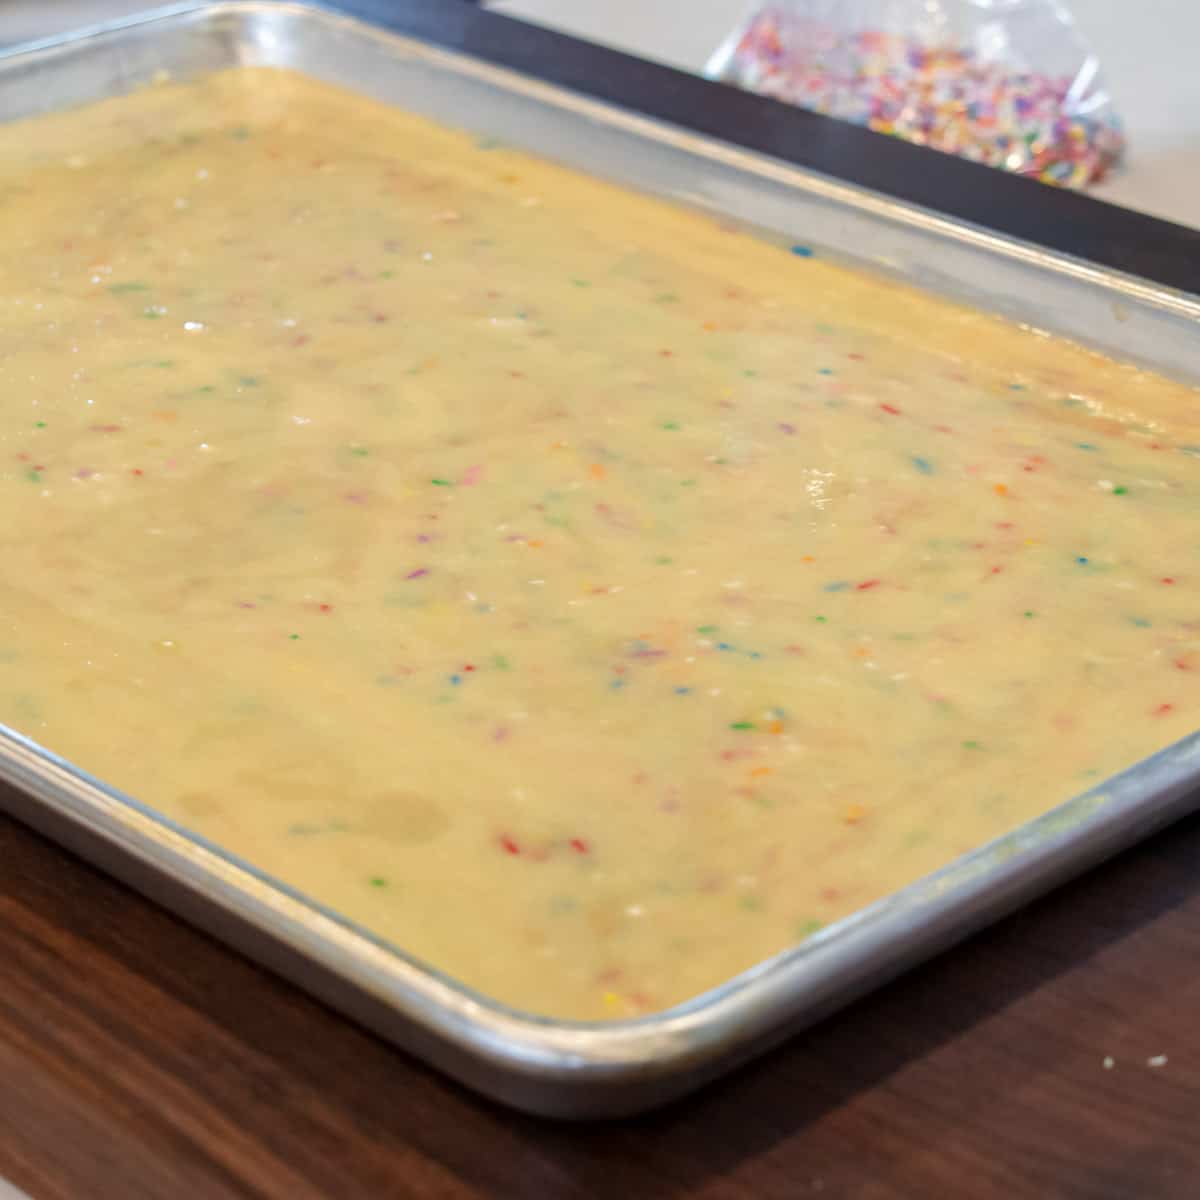 Cake batter poured into a baking sheet and ready to go into the oven.